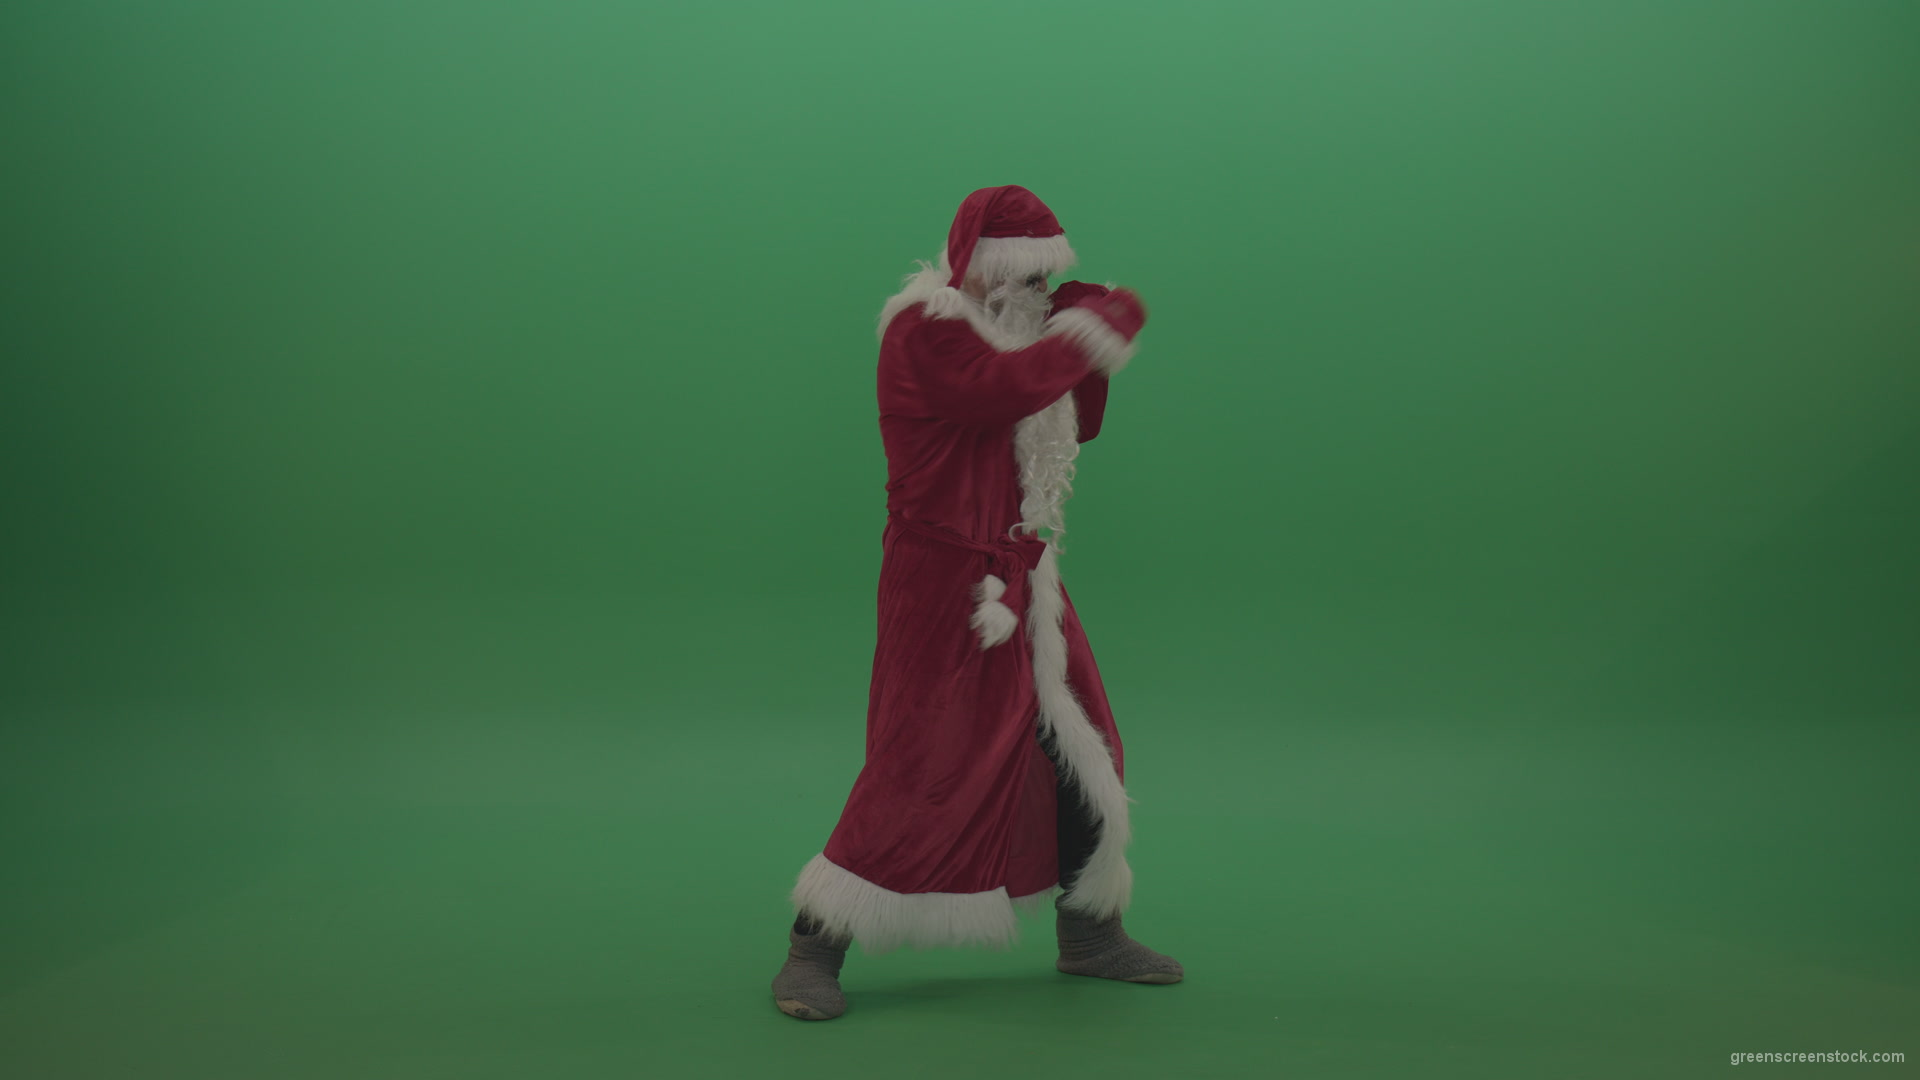 Santa-in-black-glasses-show-cases-his-boxing-skills-over-chromakey-background_008 Green Screen Stock